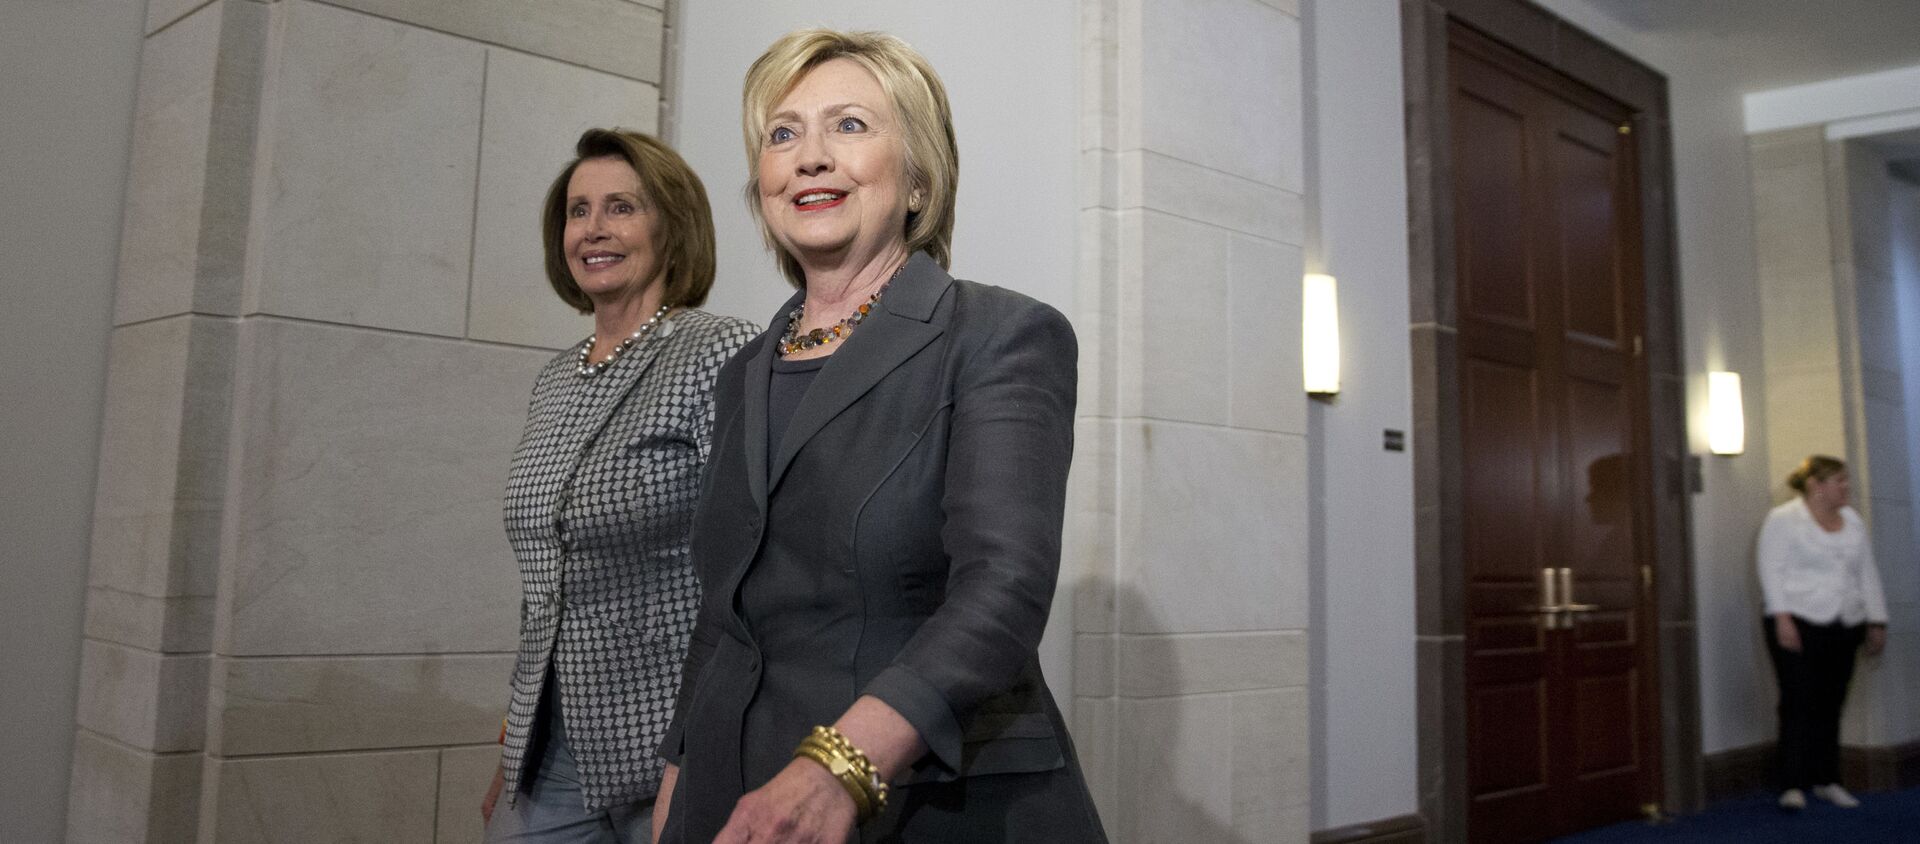 Democratic presidential candidate Hillary Clinton walks with House Minority Leader Nancy Pelosi of Calif. as they arrive for a meeting with the House Democratic Caucus, Wednesday, June 22, 2016, on Capitol Hill in Washington. (AP Photo/Alex Brandon) - Sputnik International, 1920, 19.01.2021